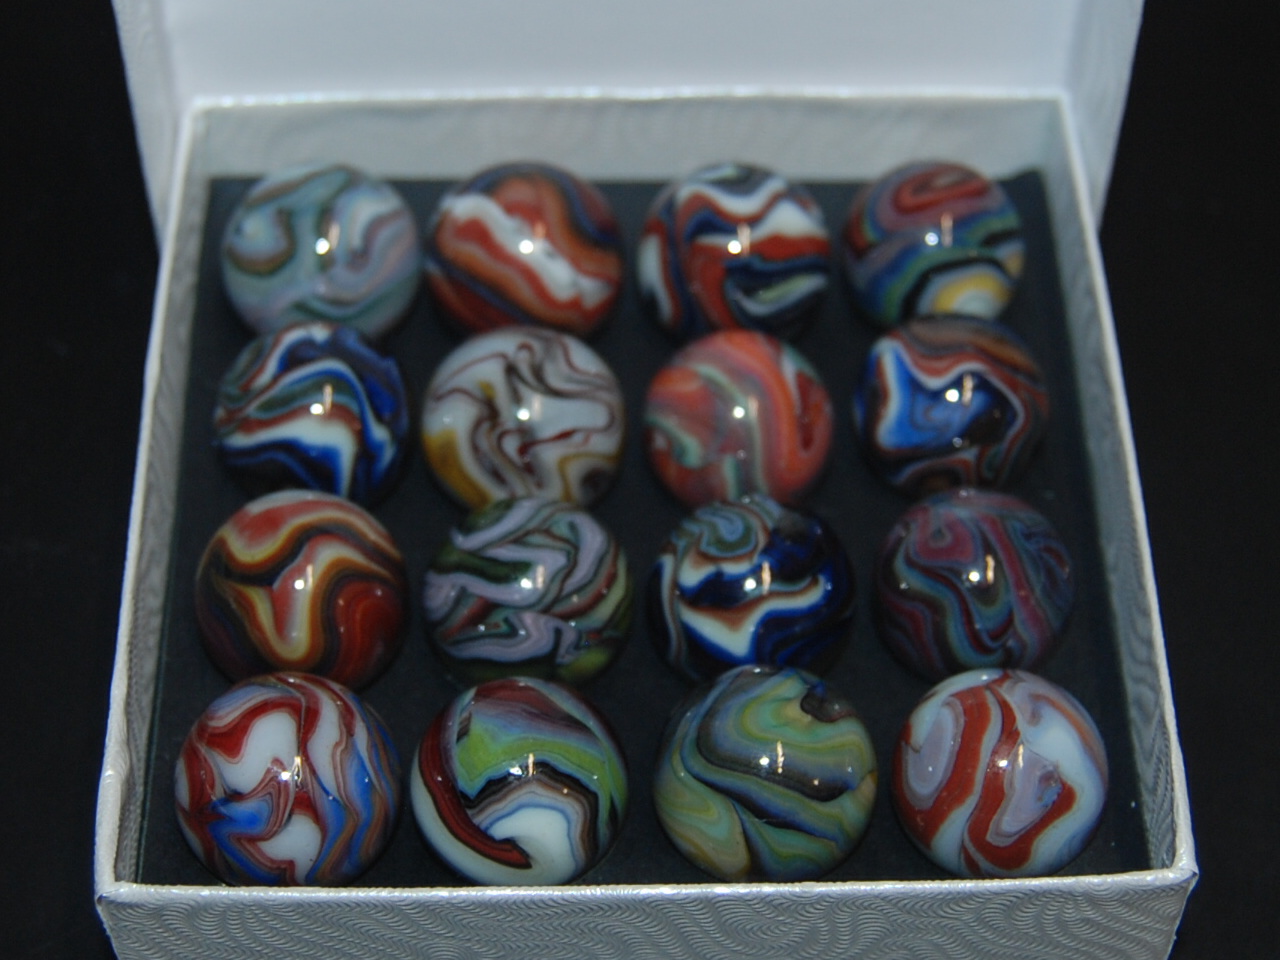 Details about   2009 JABO JOKER RAINBOW # 'I'  3/4" MARBLES BOX SET OF 6  WITH OXBLOOD B 